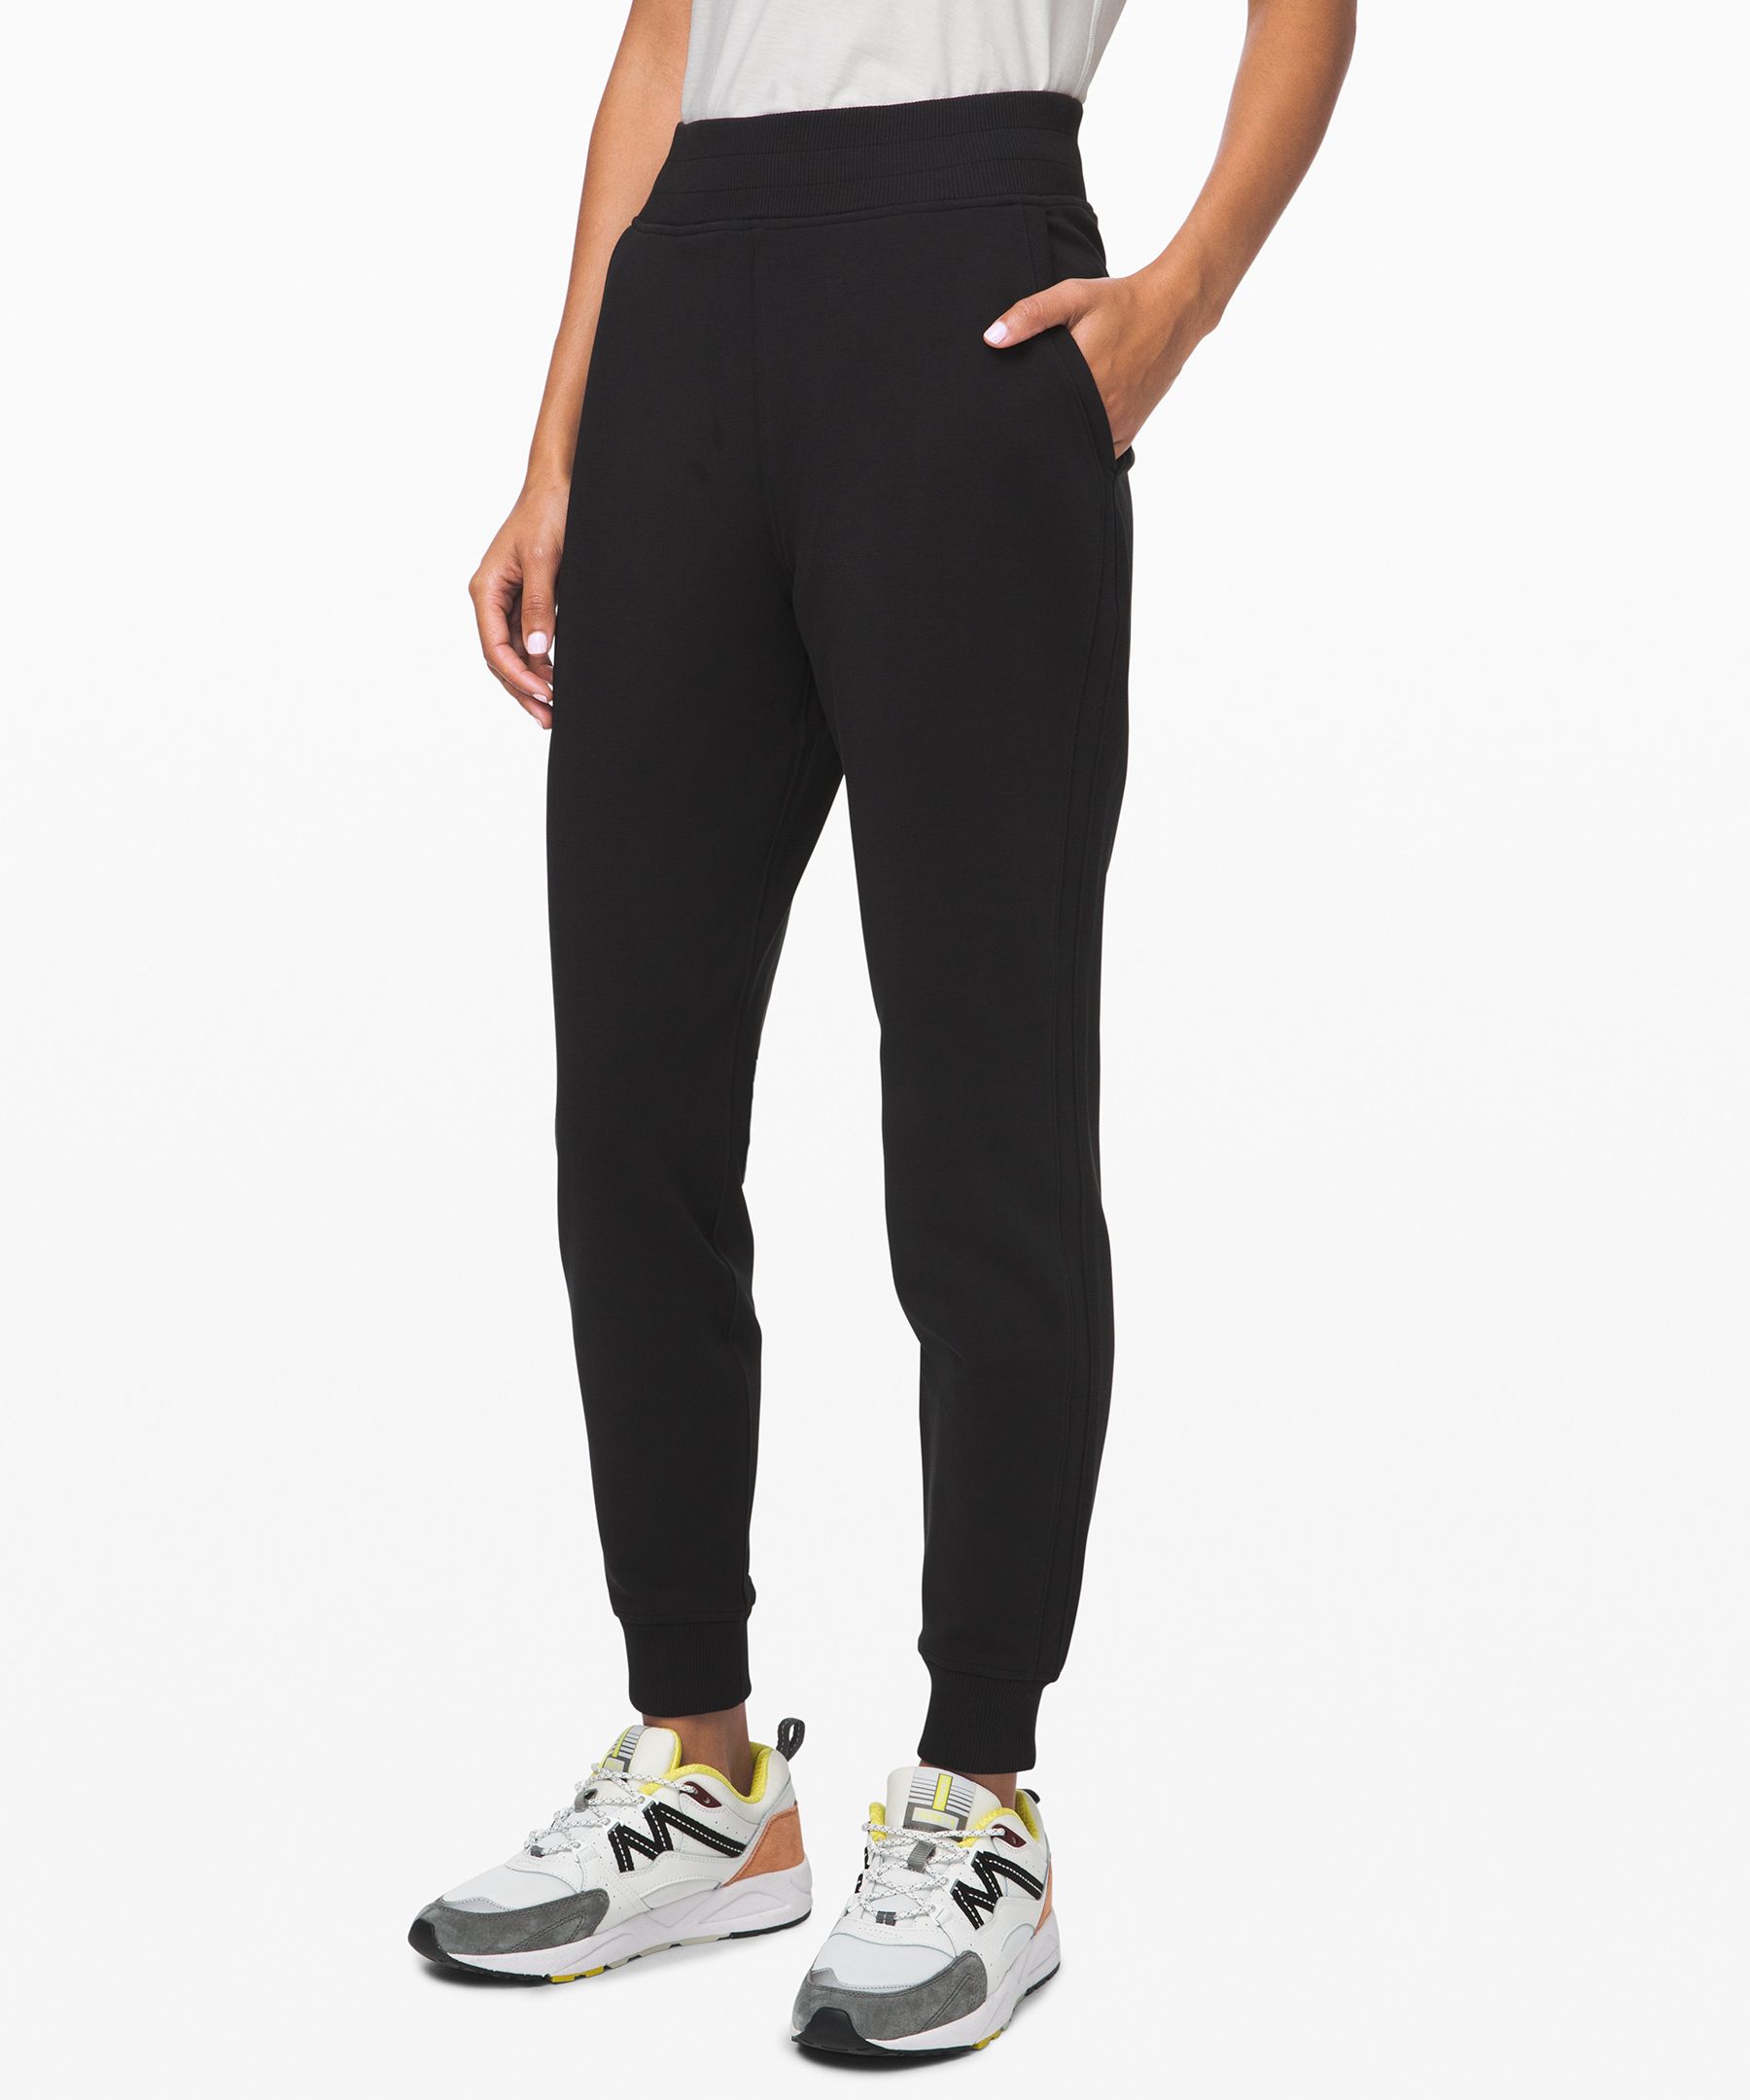 What Shoes To Wear With Lululemon Joggers Women's Size